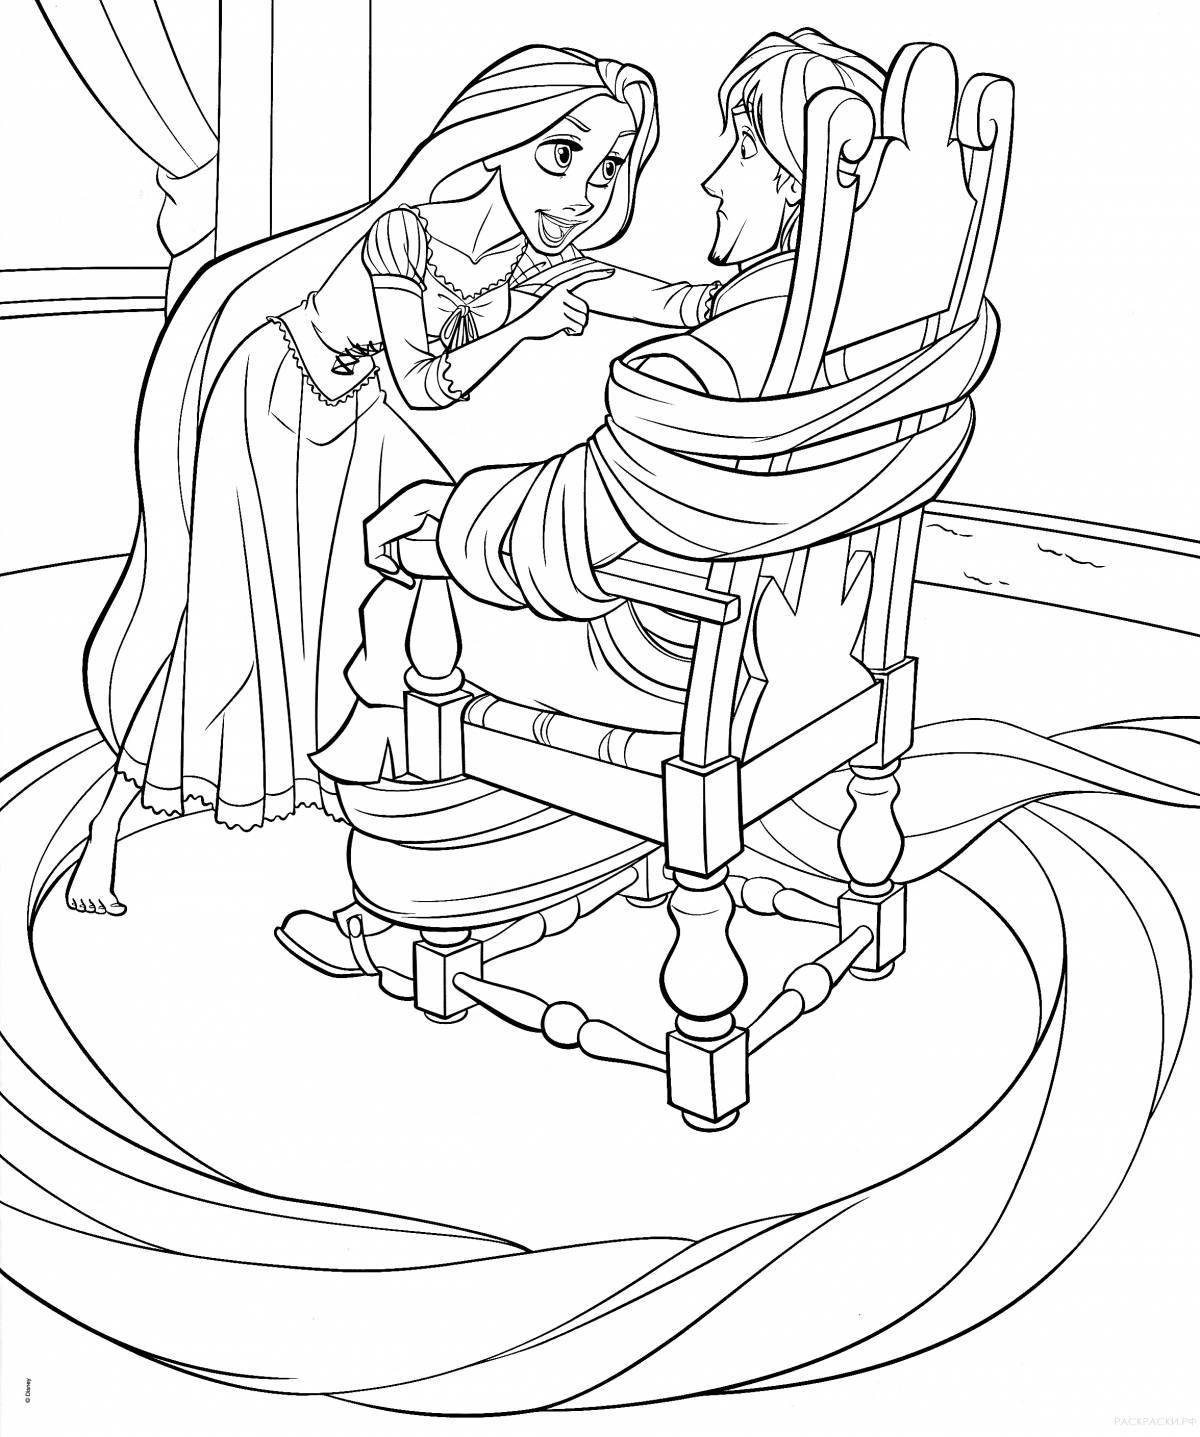 Great rapunzel coloring book for kids 5-6 years old